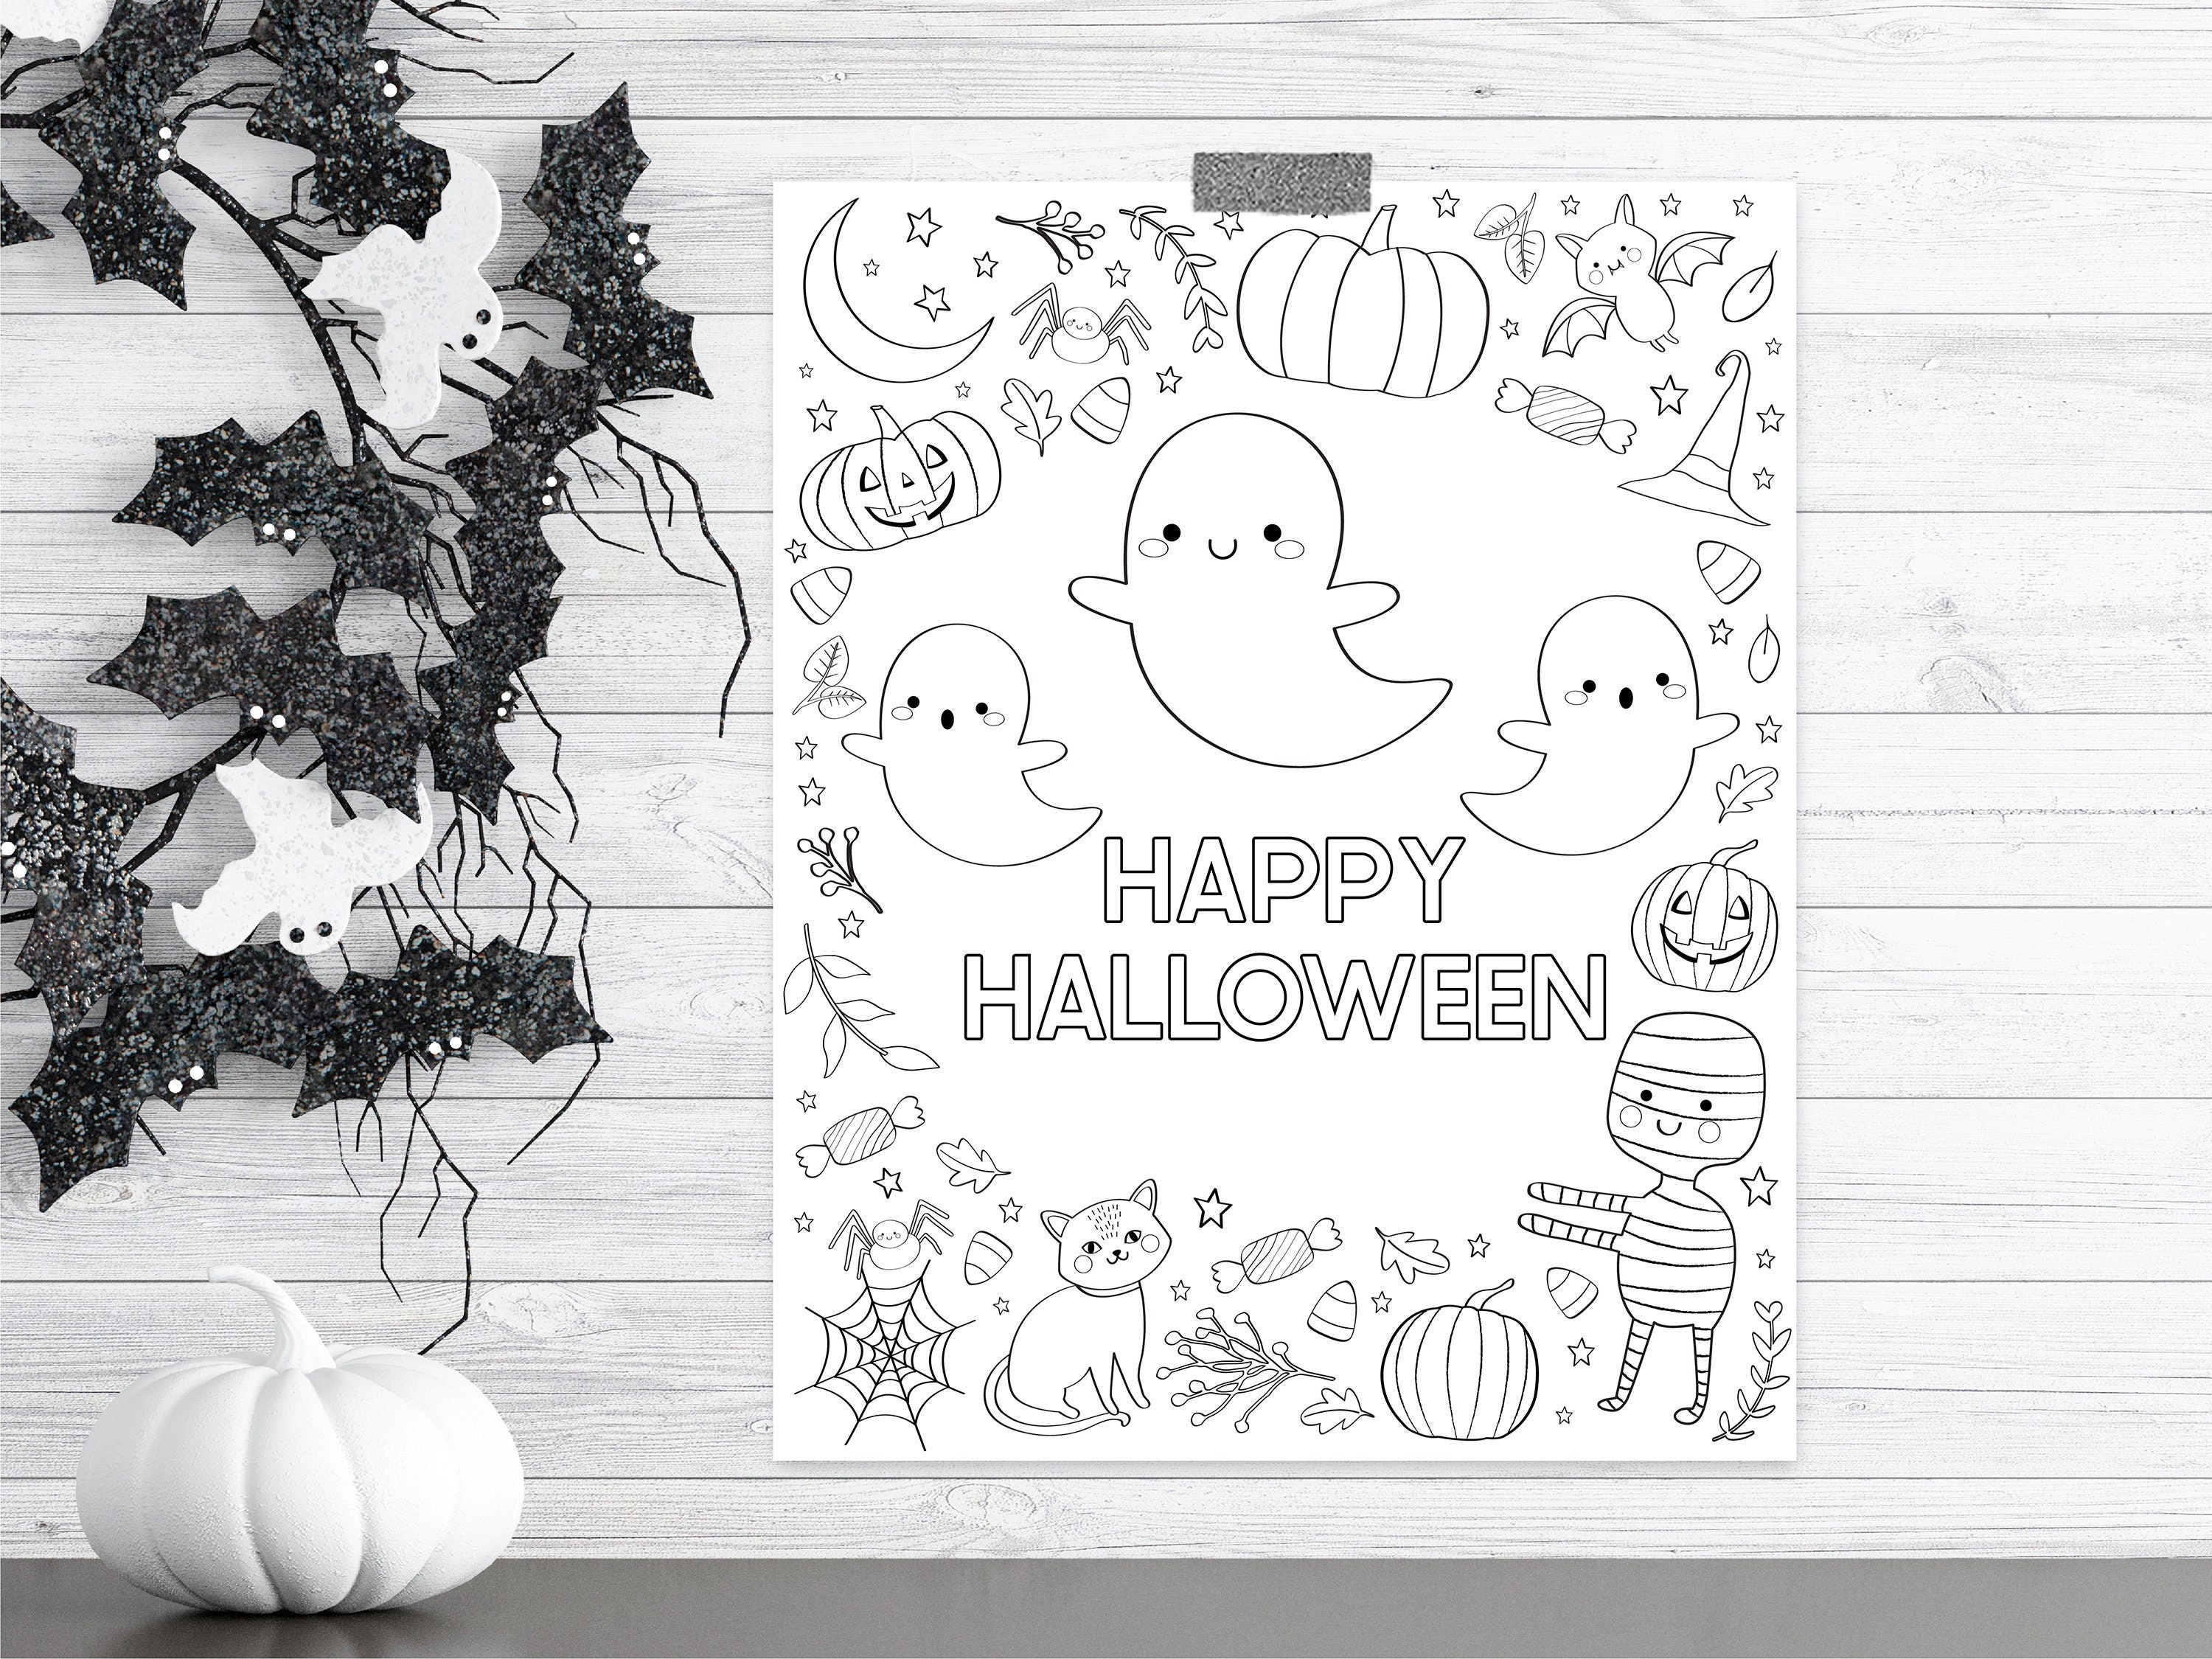 Spooky cute halloween coloring page halloween party activity ghost pumpkin spider candy happy halloween printable coloring page download